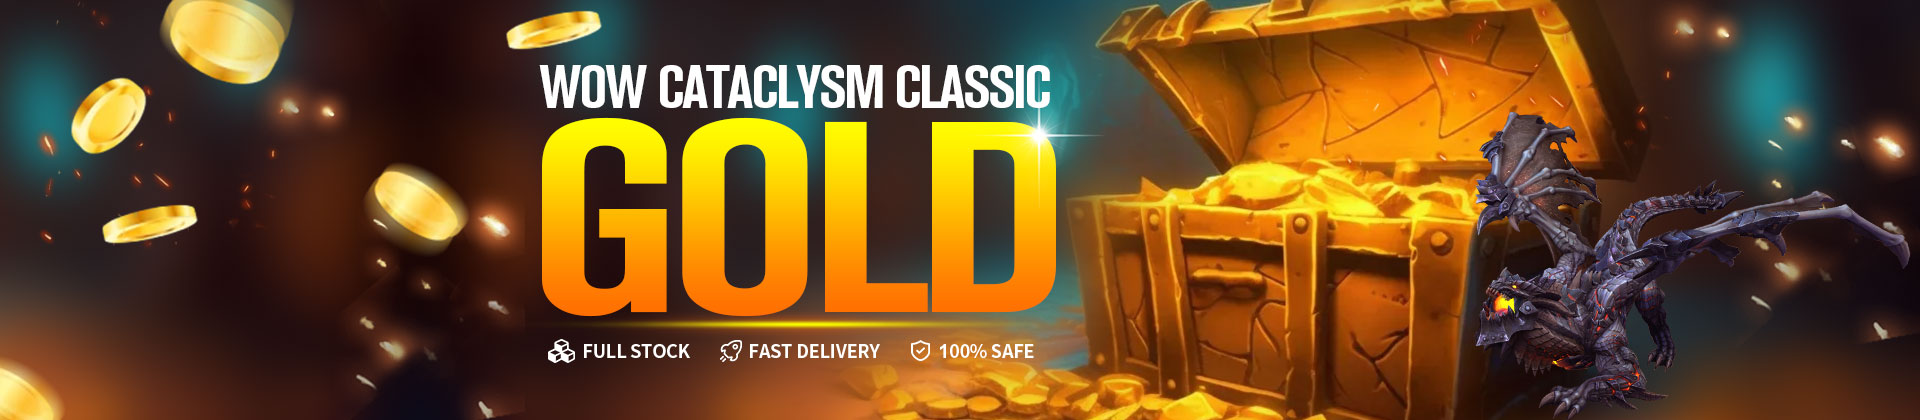 WoW Cataclysm Classic Gold